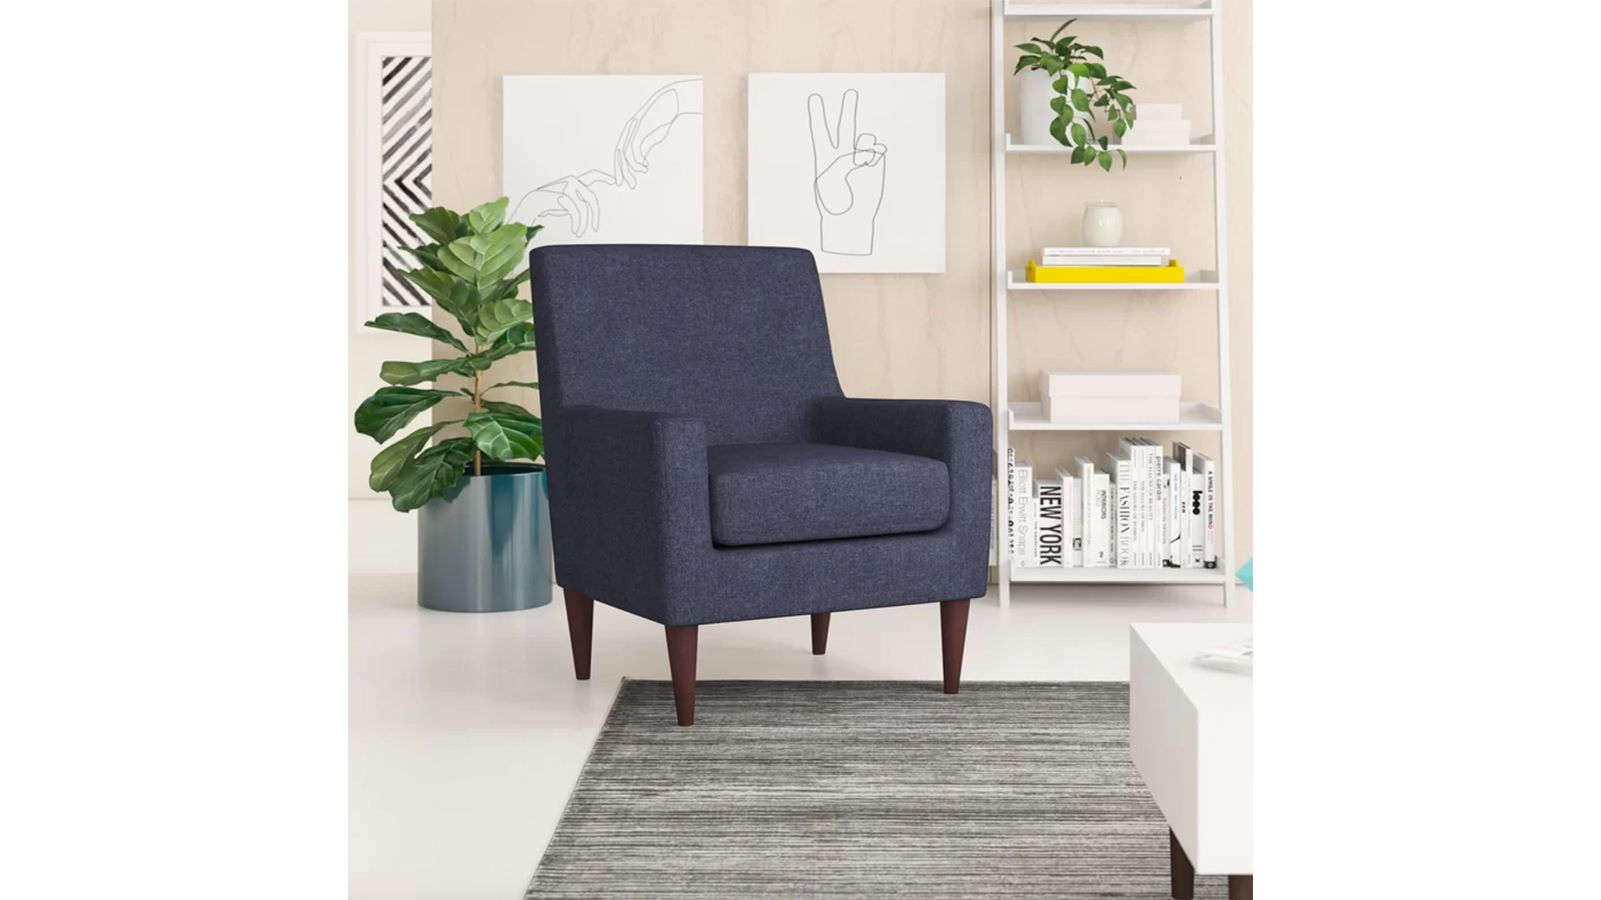 Ideas Chair king labor day sale for Ideas for 2021